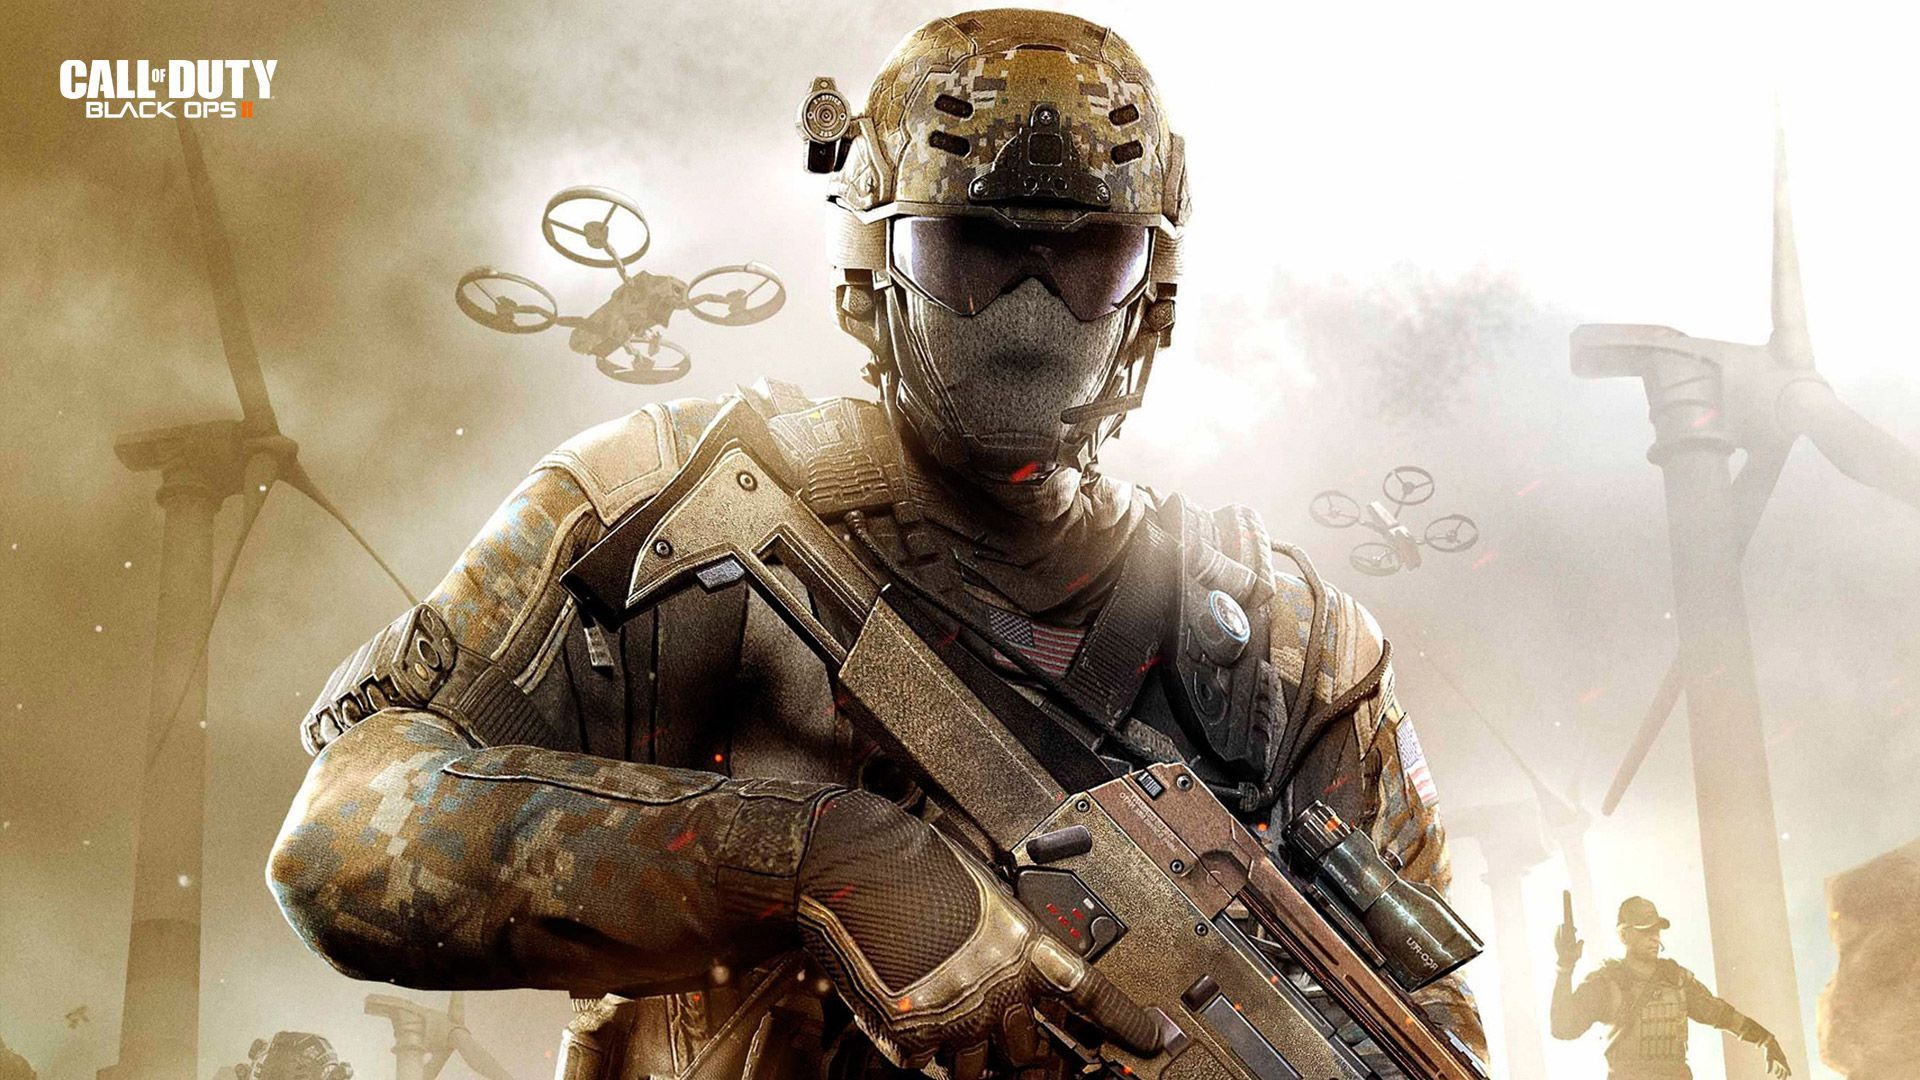 Call Of Duty Wallpapers High Quality Download Free